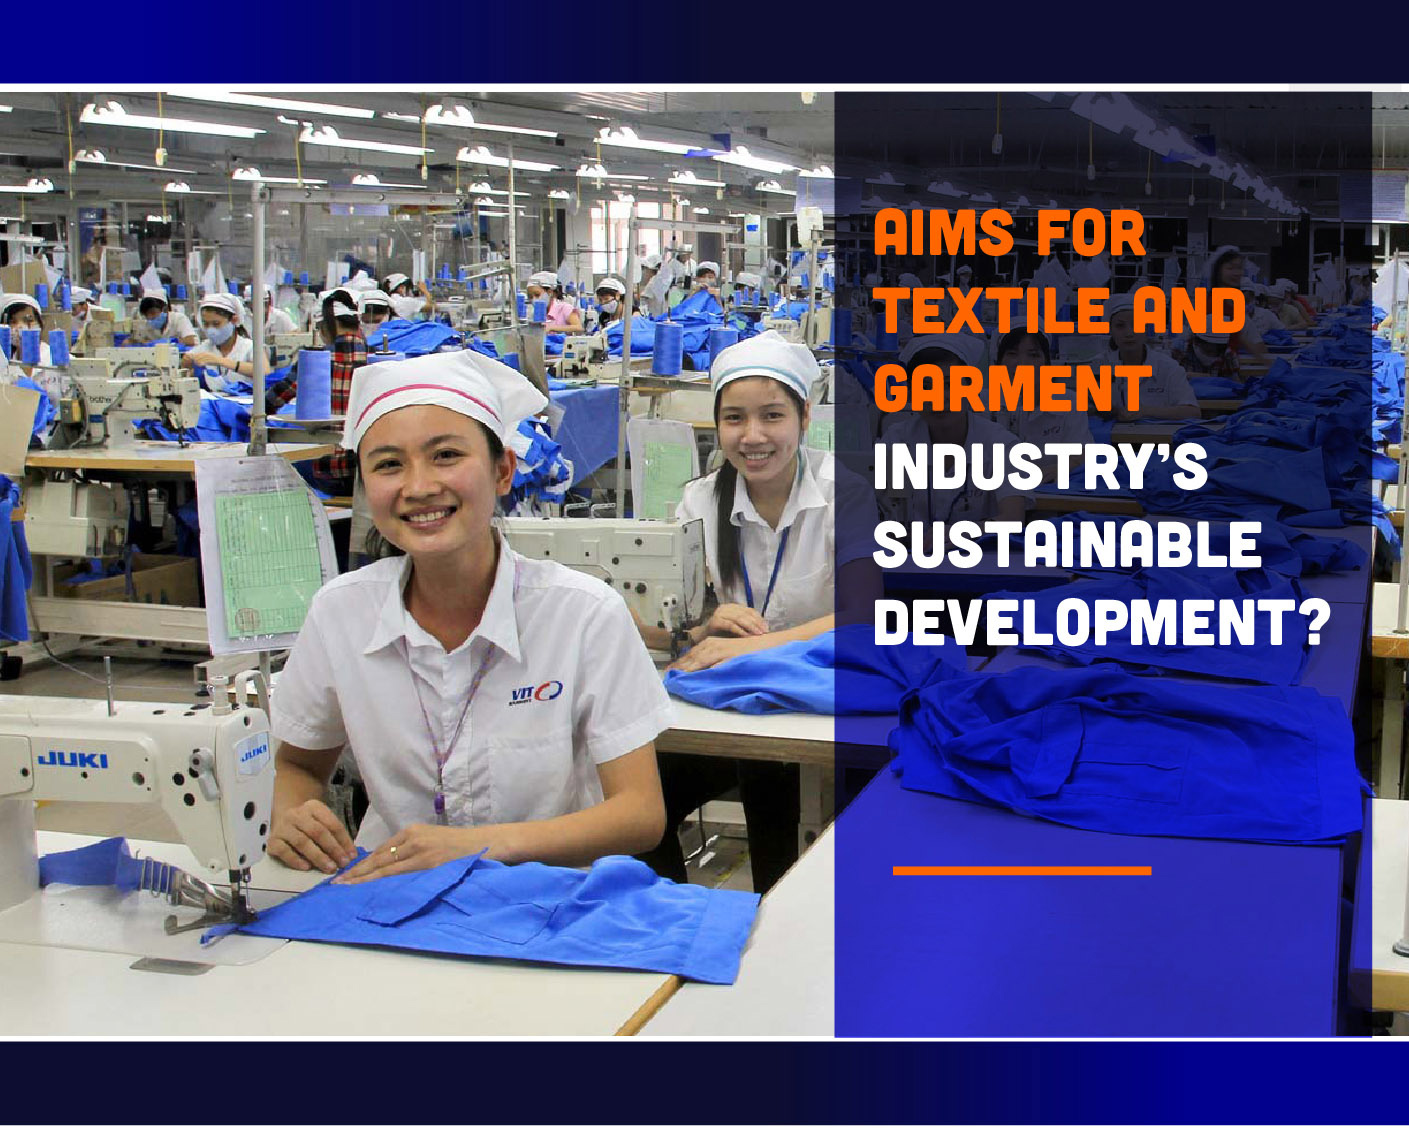 AIMS FOR TEXTILE AND GARMENT INDUSTRY’S SUSTAINABLE DEVELOPMENT?